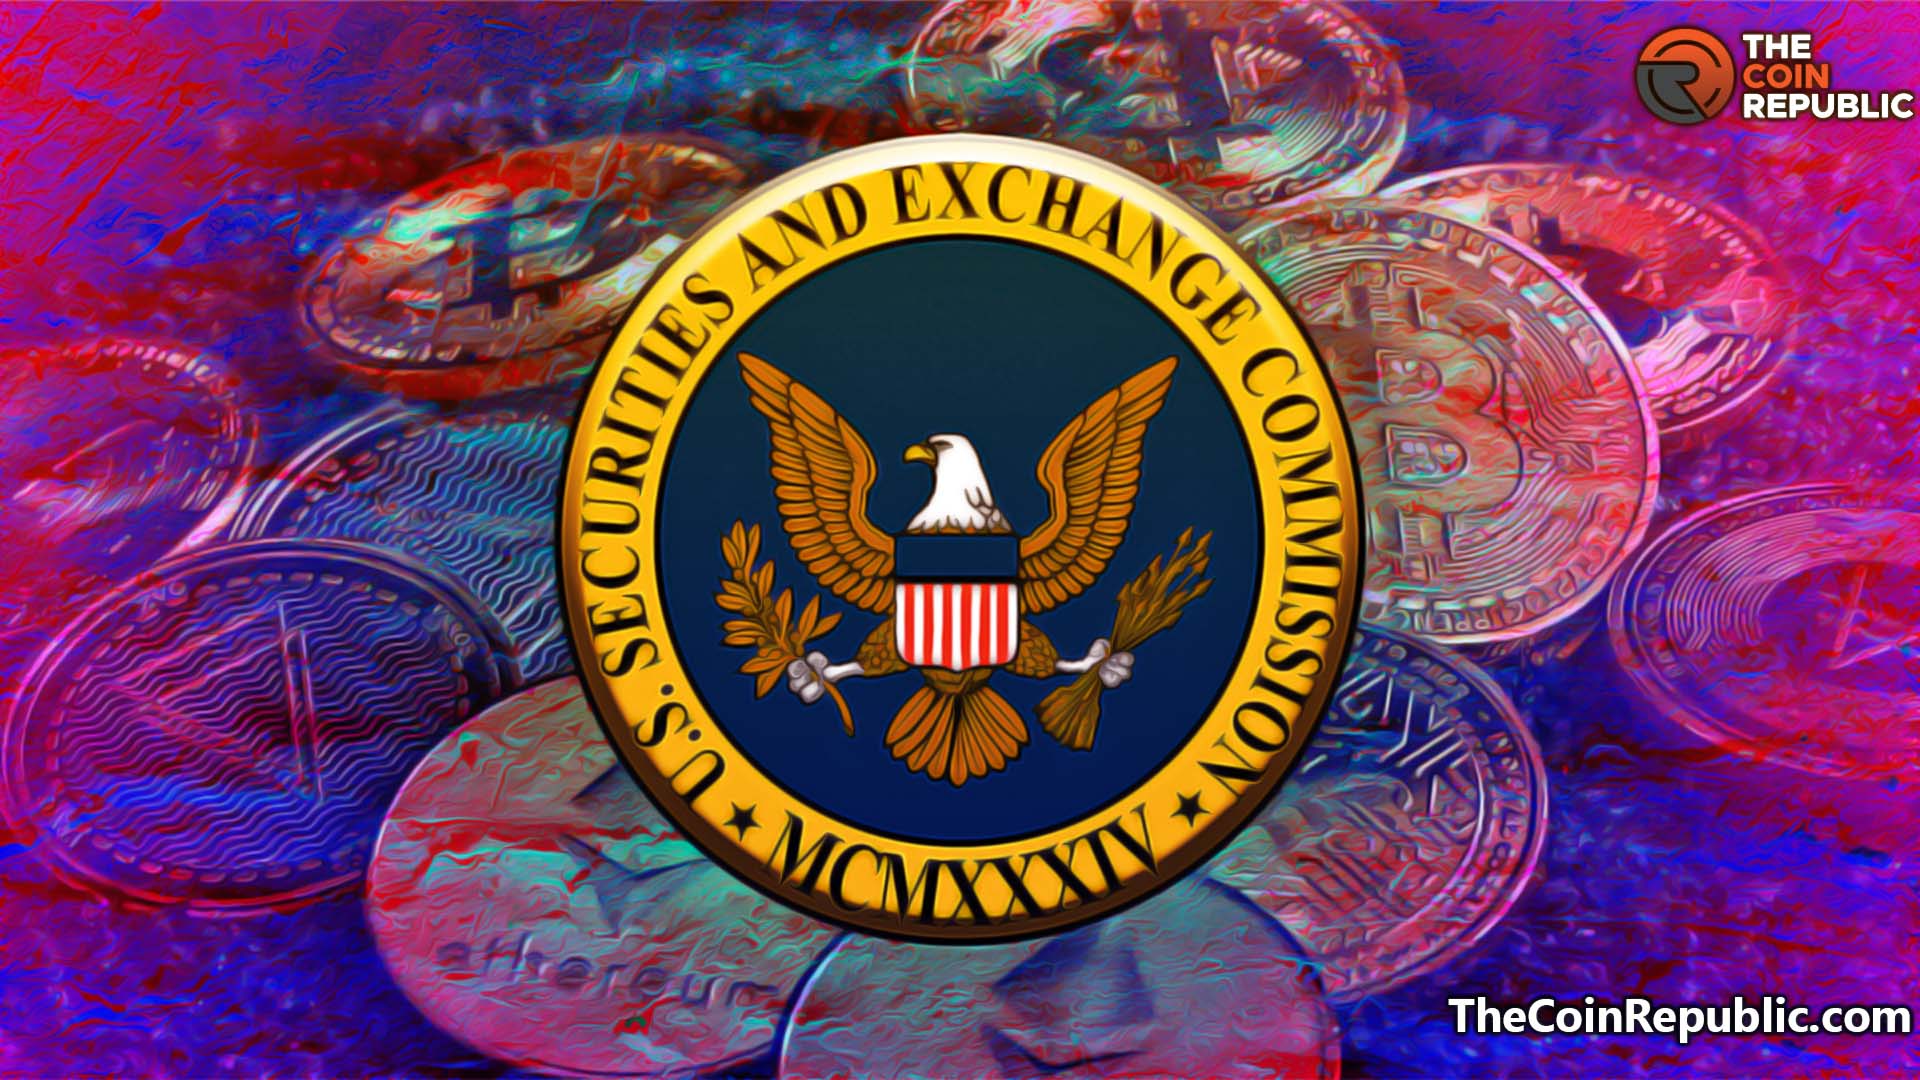 Proposed SEC Custody Rules Deemed ‘War on Crypto’ By Proponents